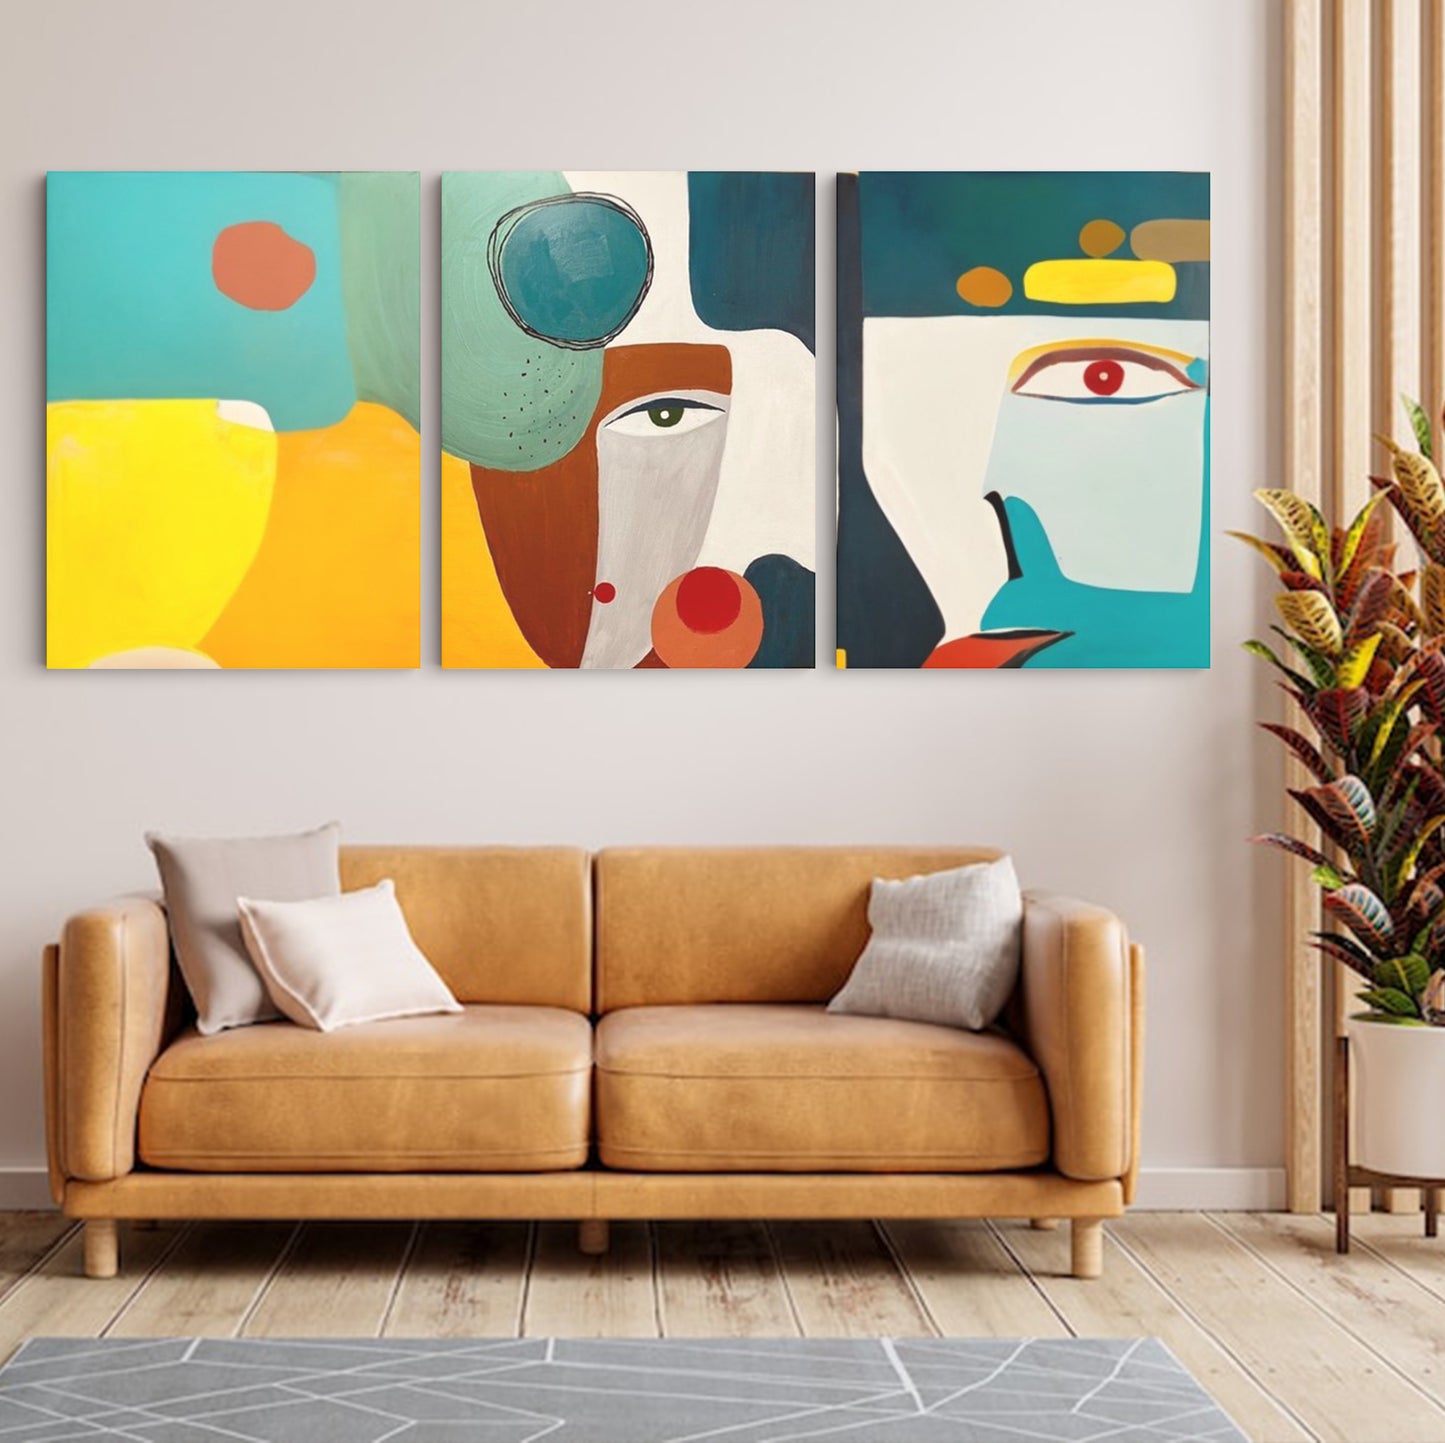 Ethereal Elegance: Abstract Lady - Captivating Wall Art Celebrating the Intriguing Beauty and Grace of Abstract Forms - S06E10